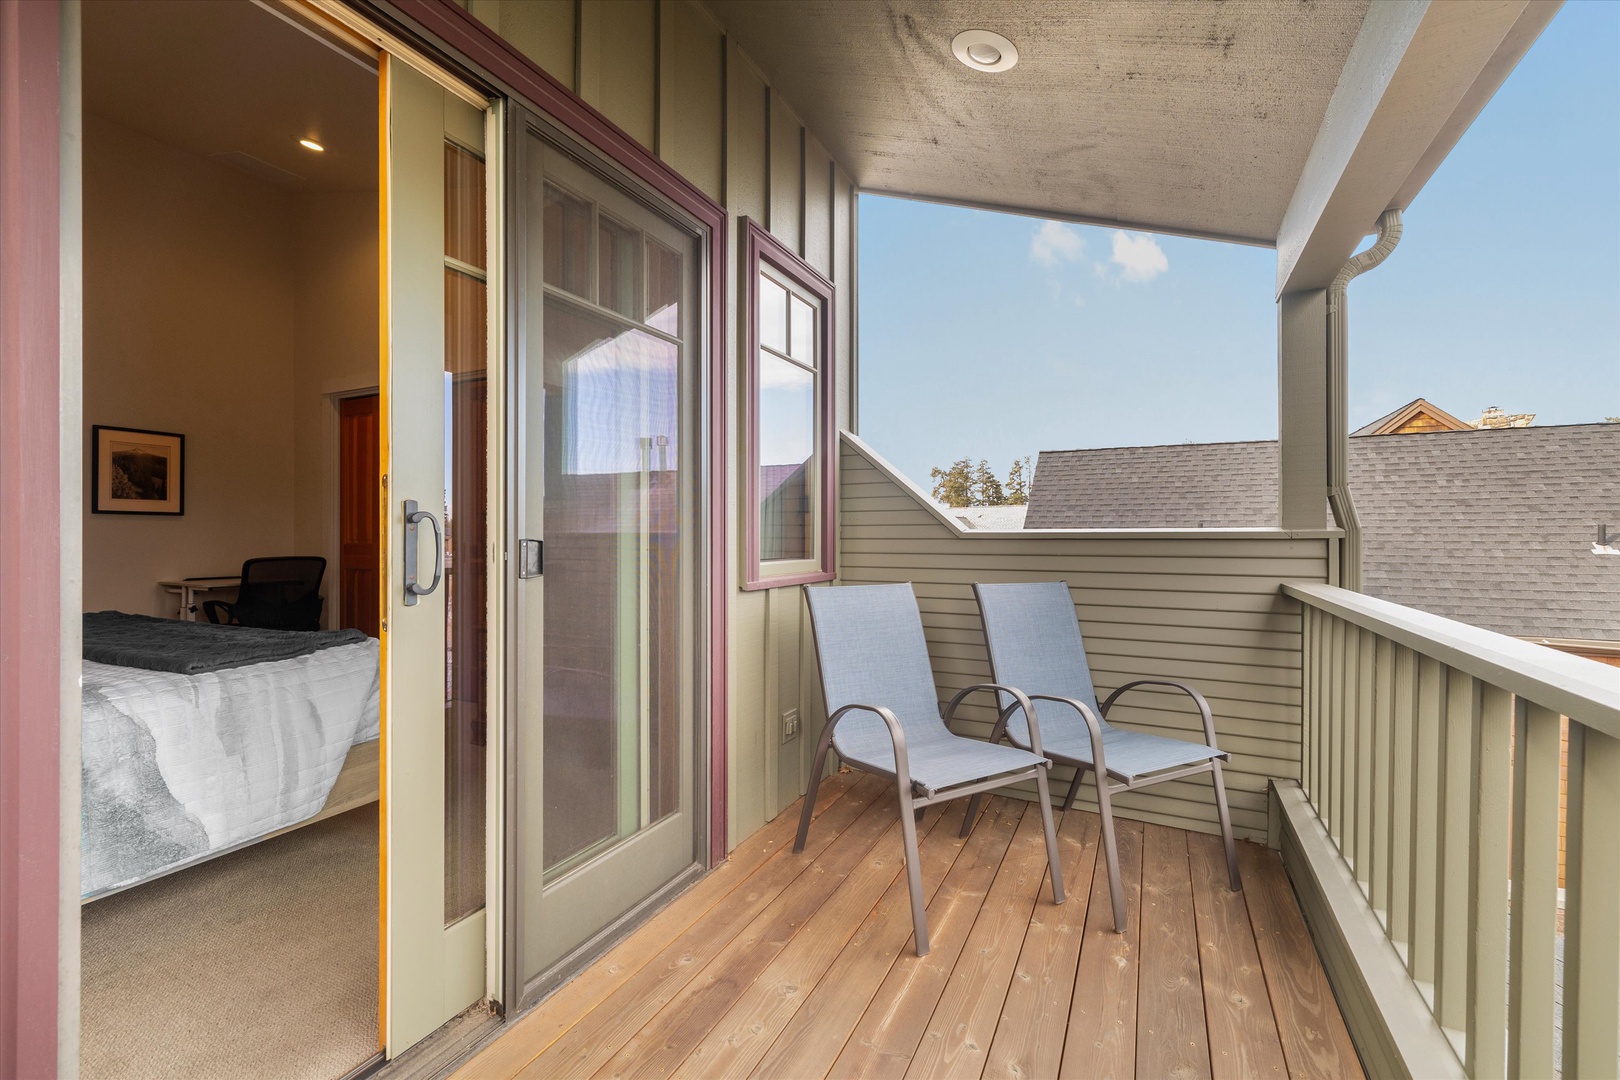 The balcony off the master suite is ideal for lounging in the fresh air